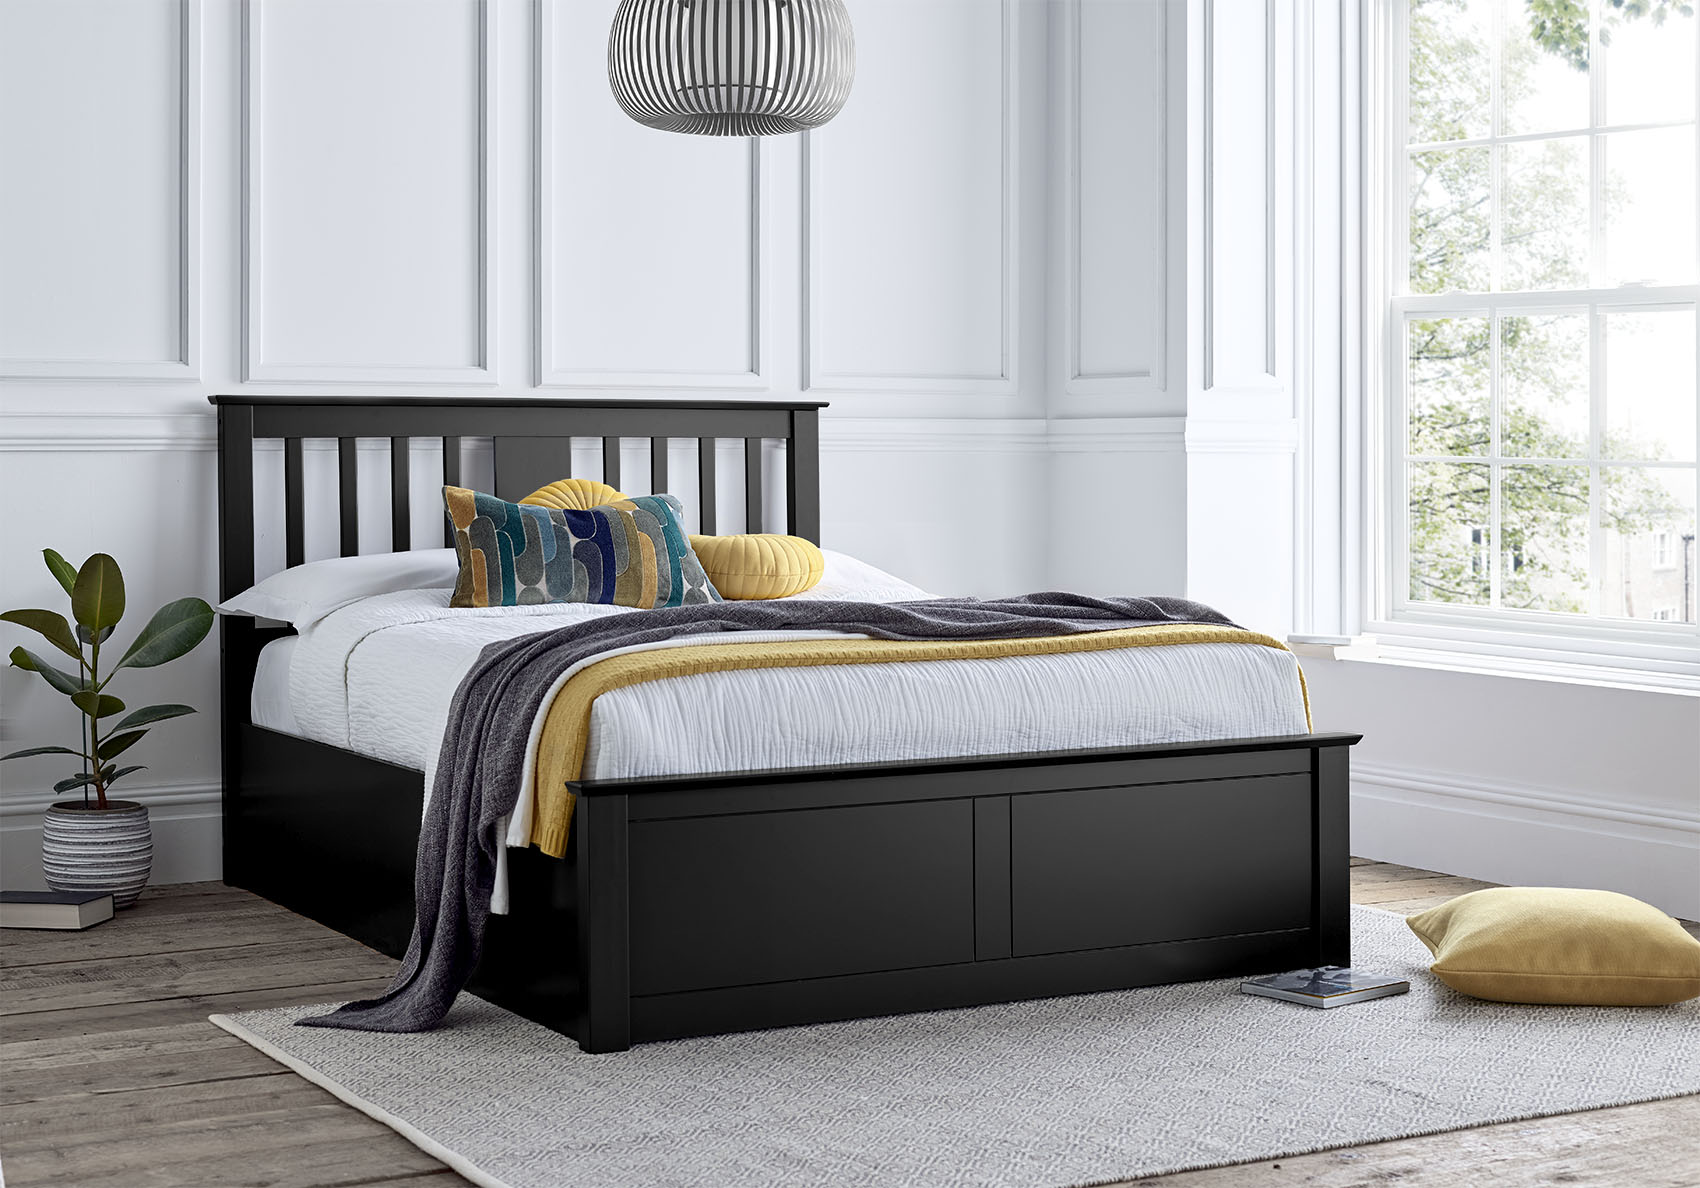 View Malmo Black Wooden Ottoman Storage Bed Time4Sleep information